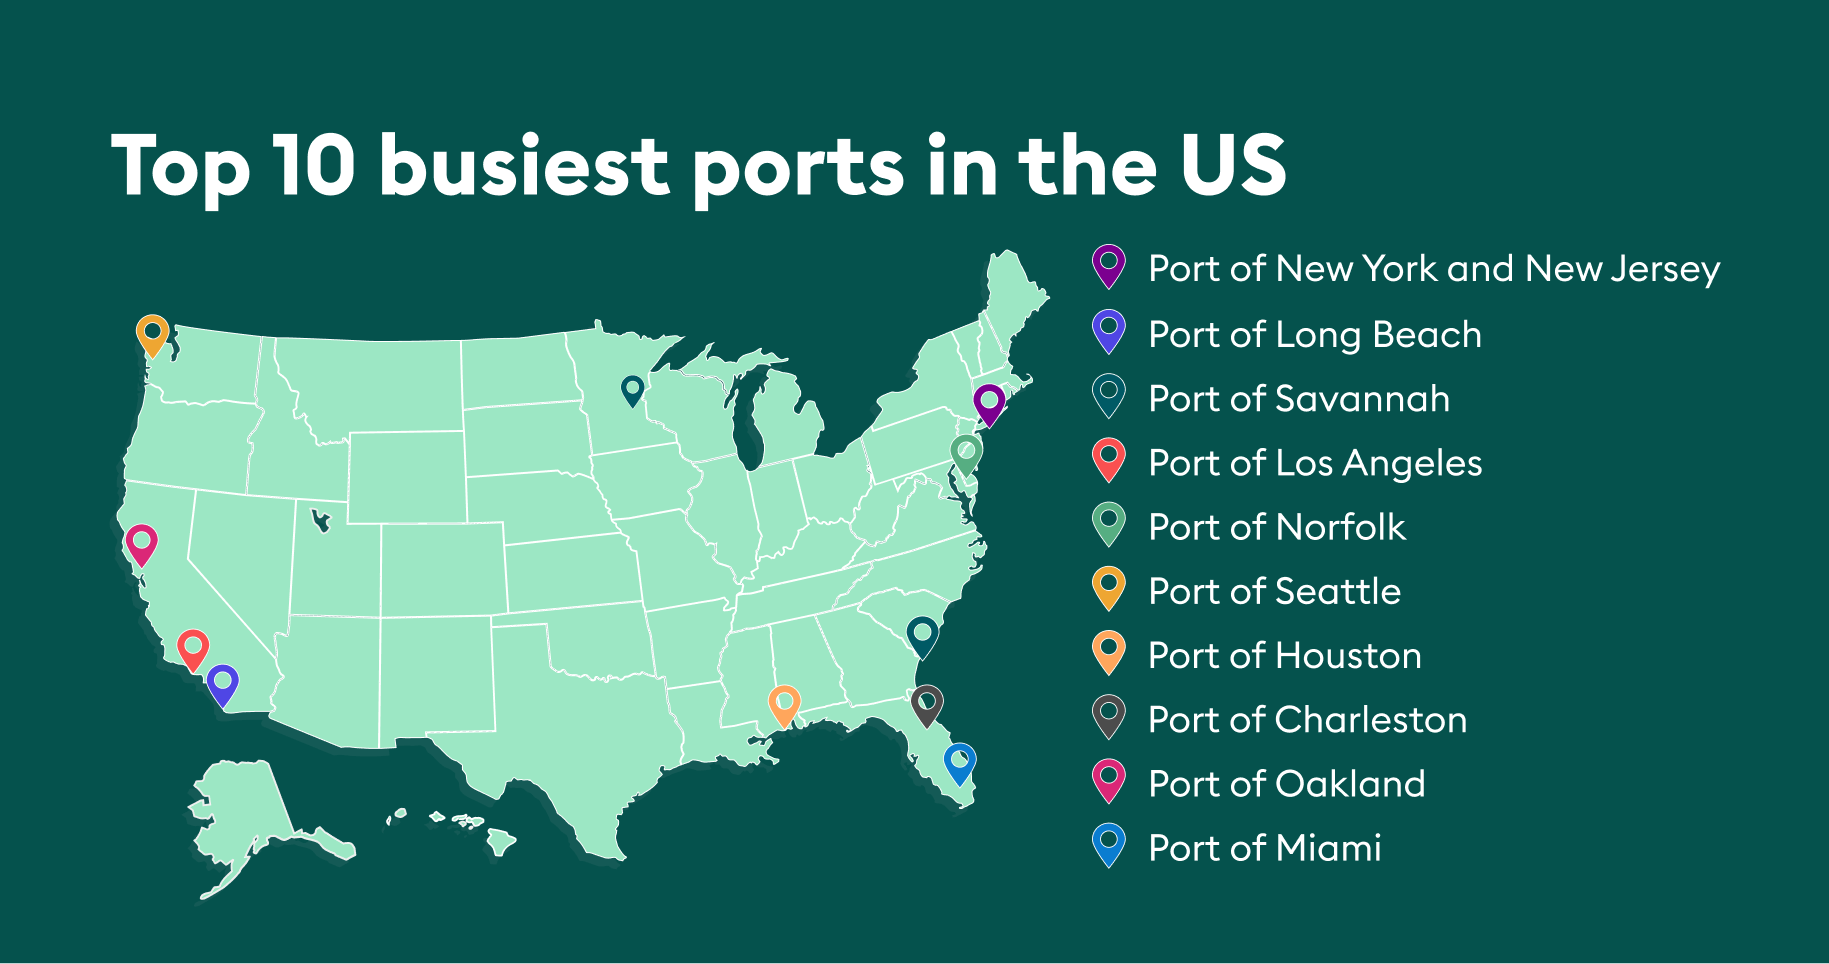 Busiest ports in the US